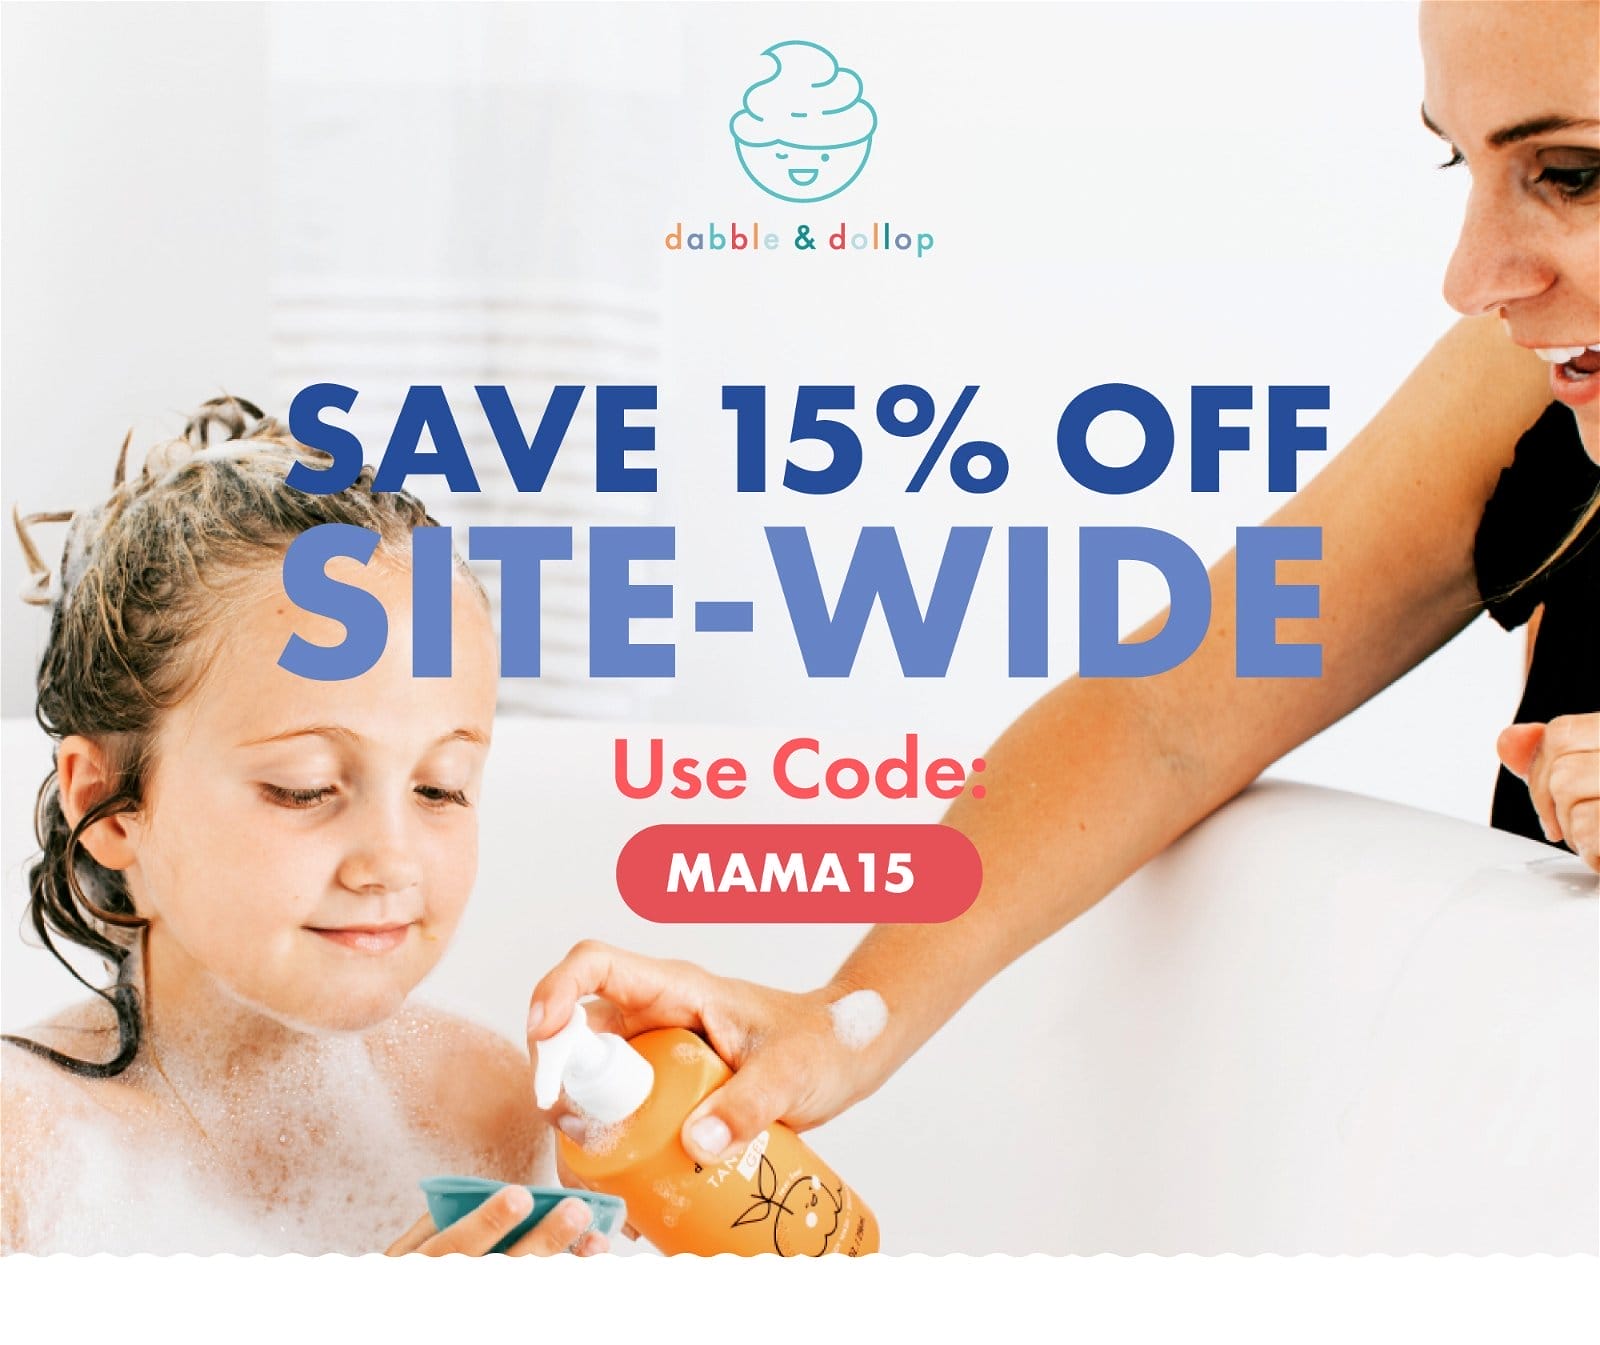 SAVE 15% OFF SITE-WIDE Use Code: MAMA15